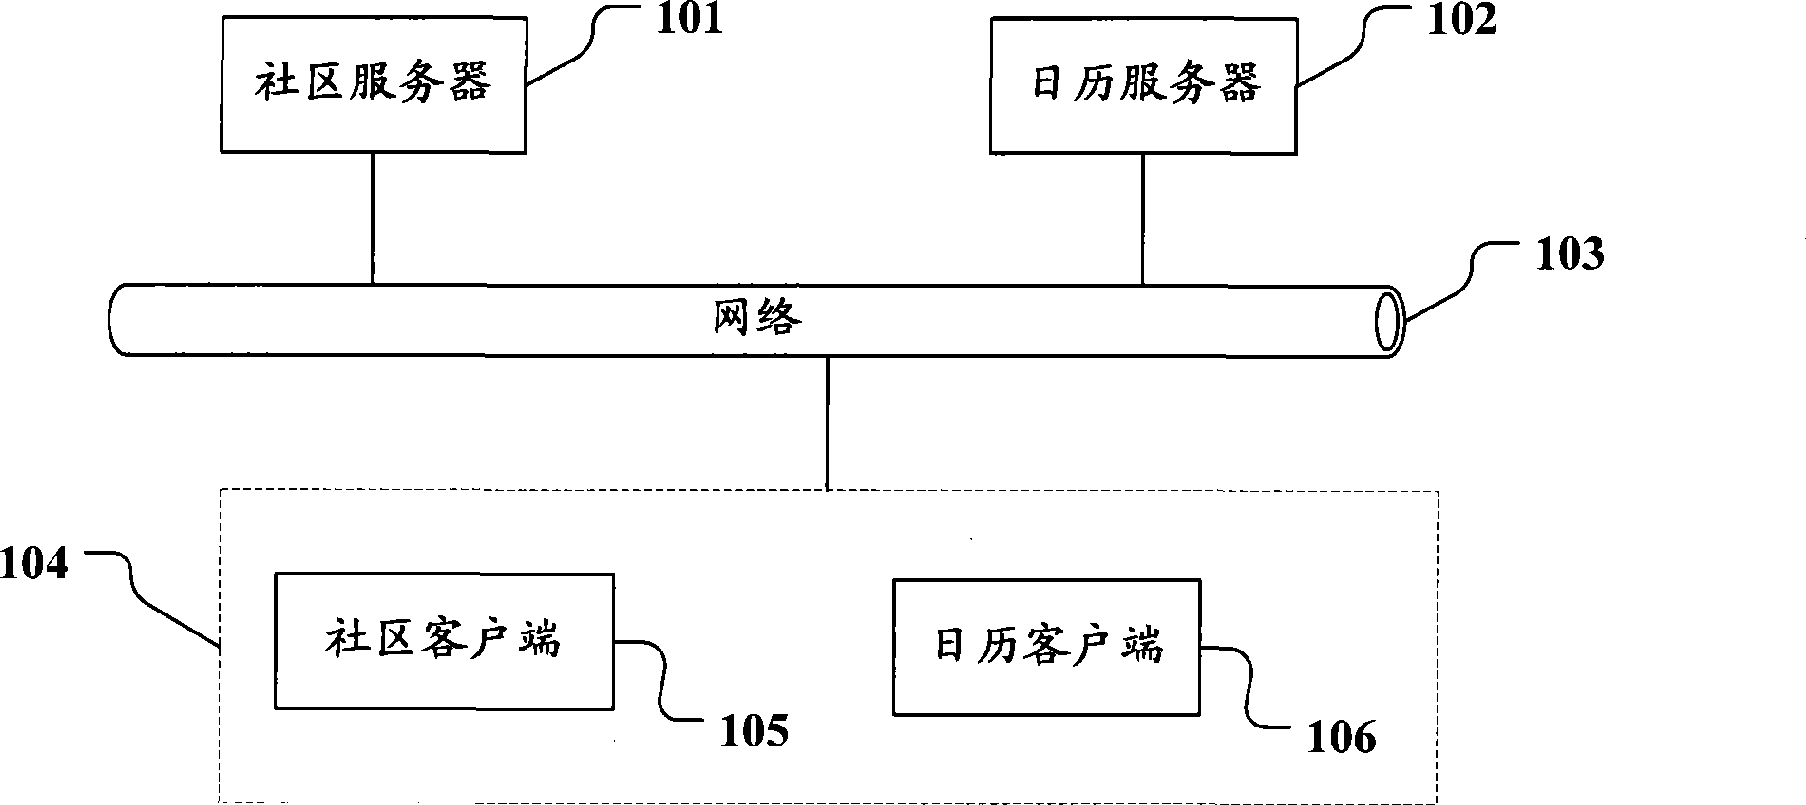 Method and equipment for updating electronic calendar appointment plan and method and equipment for generating electronic calendar appointment plan